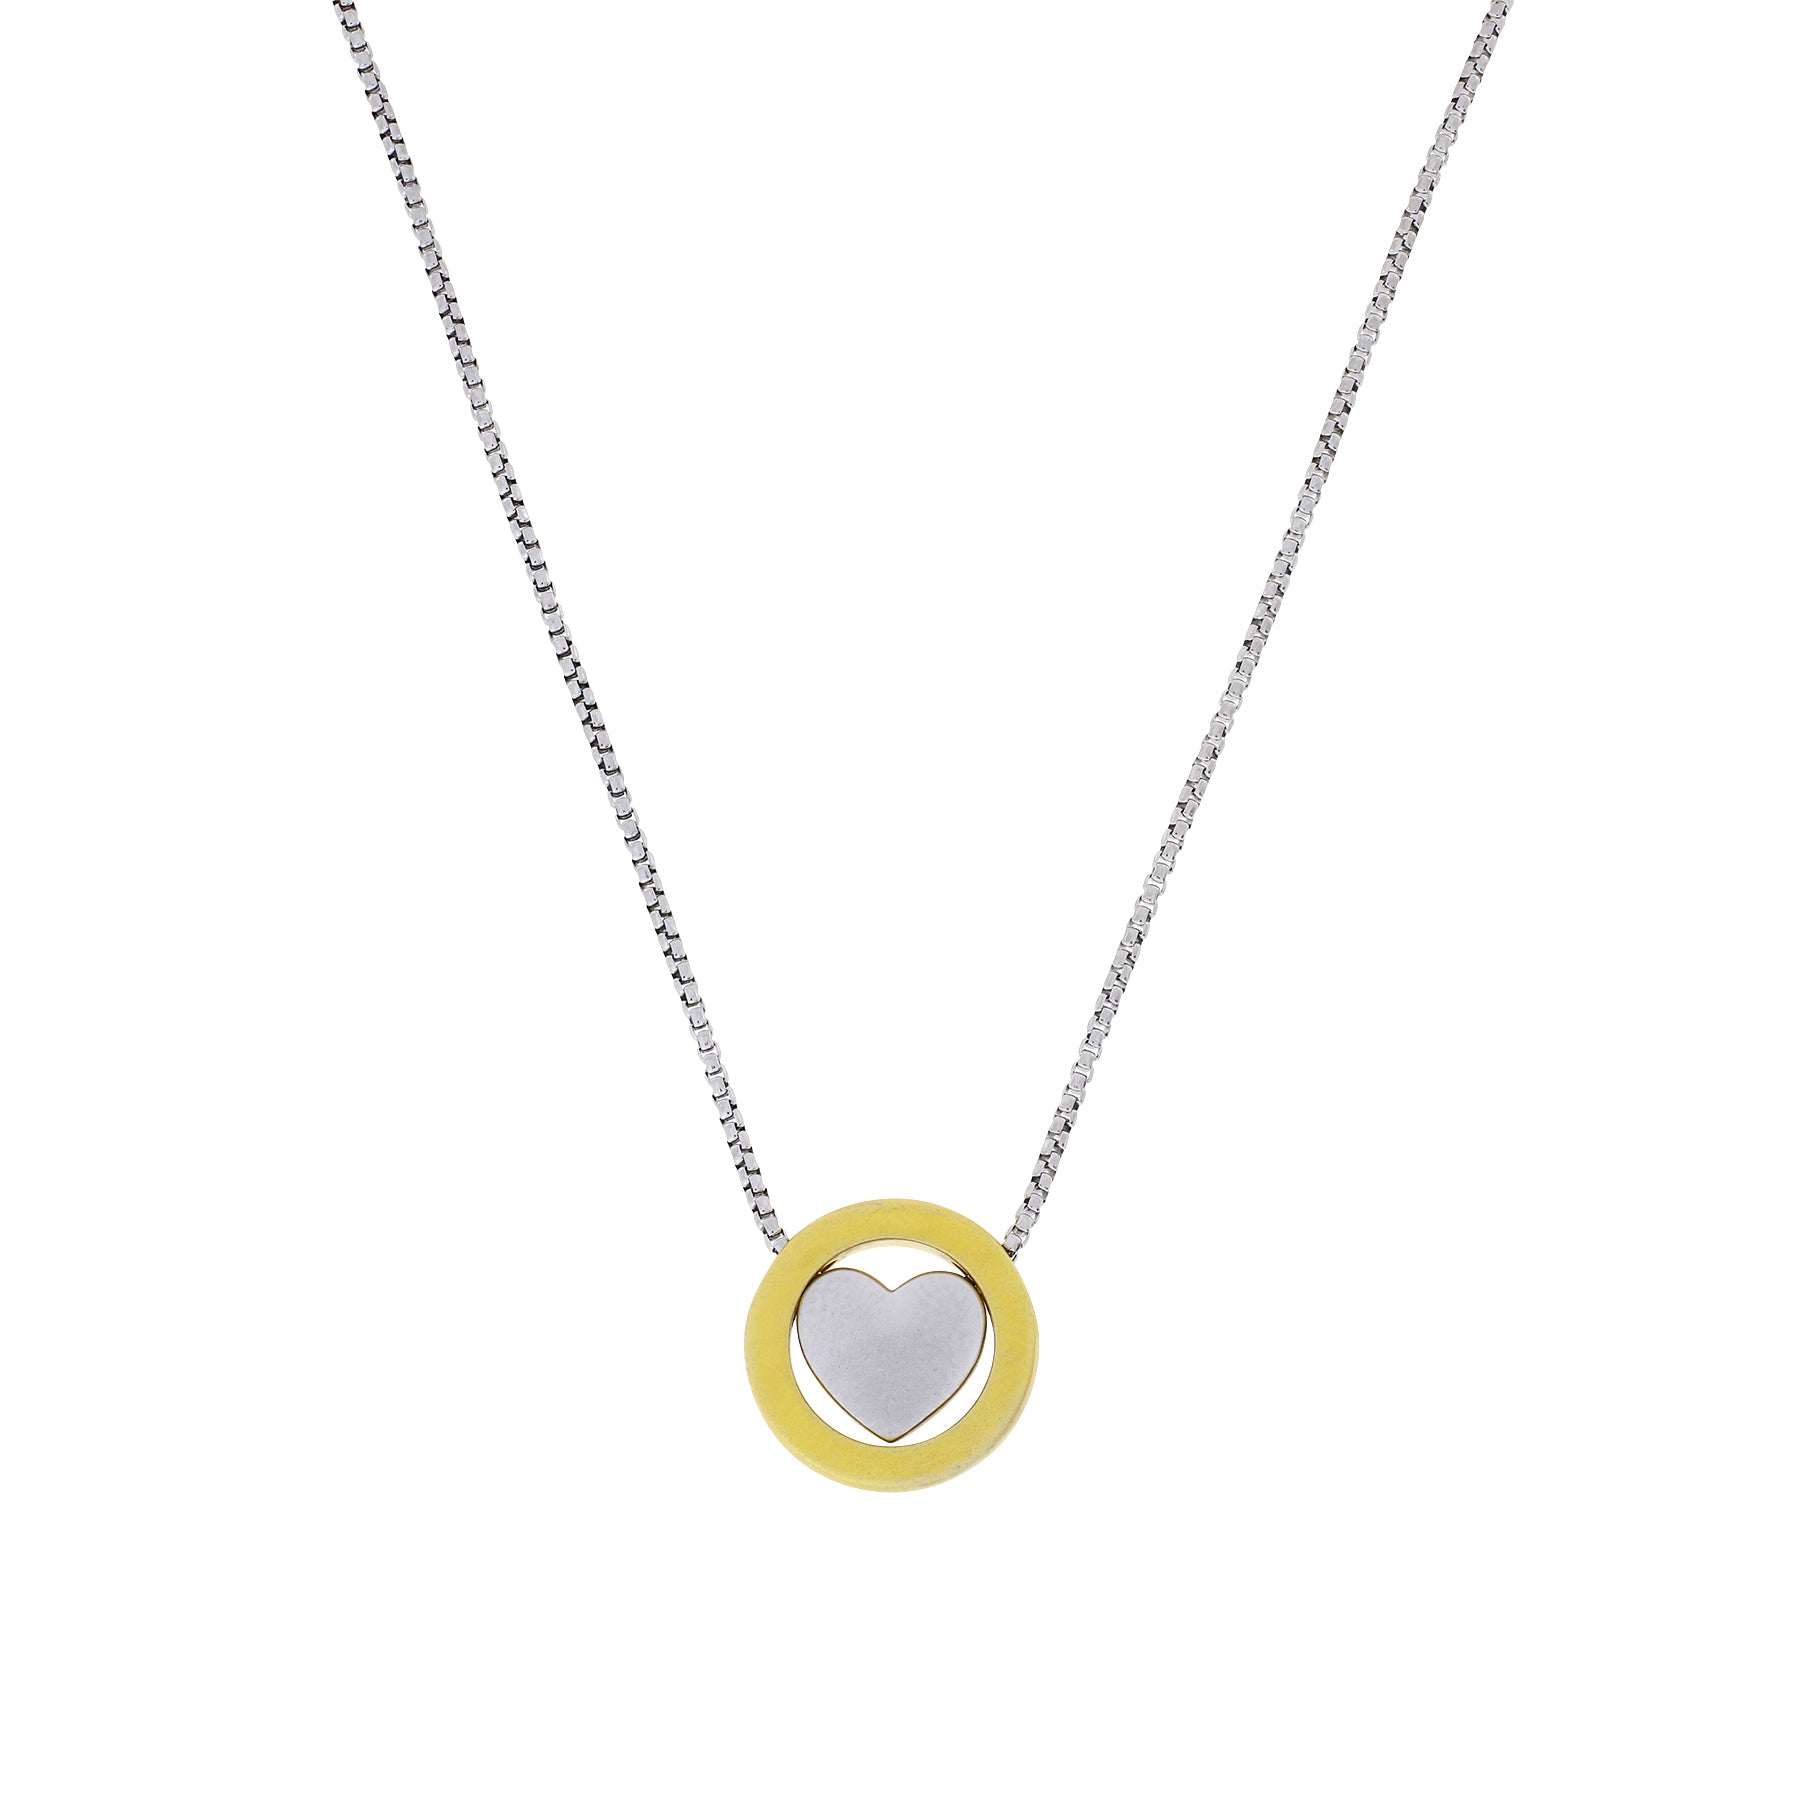 EMBRACE SILVER HEART & GOLD HALO NECKLACE